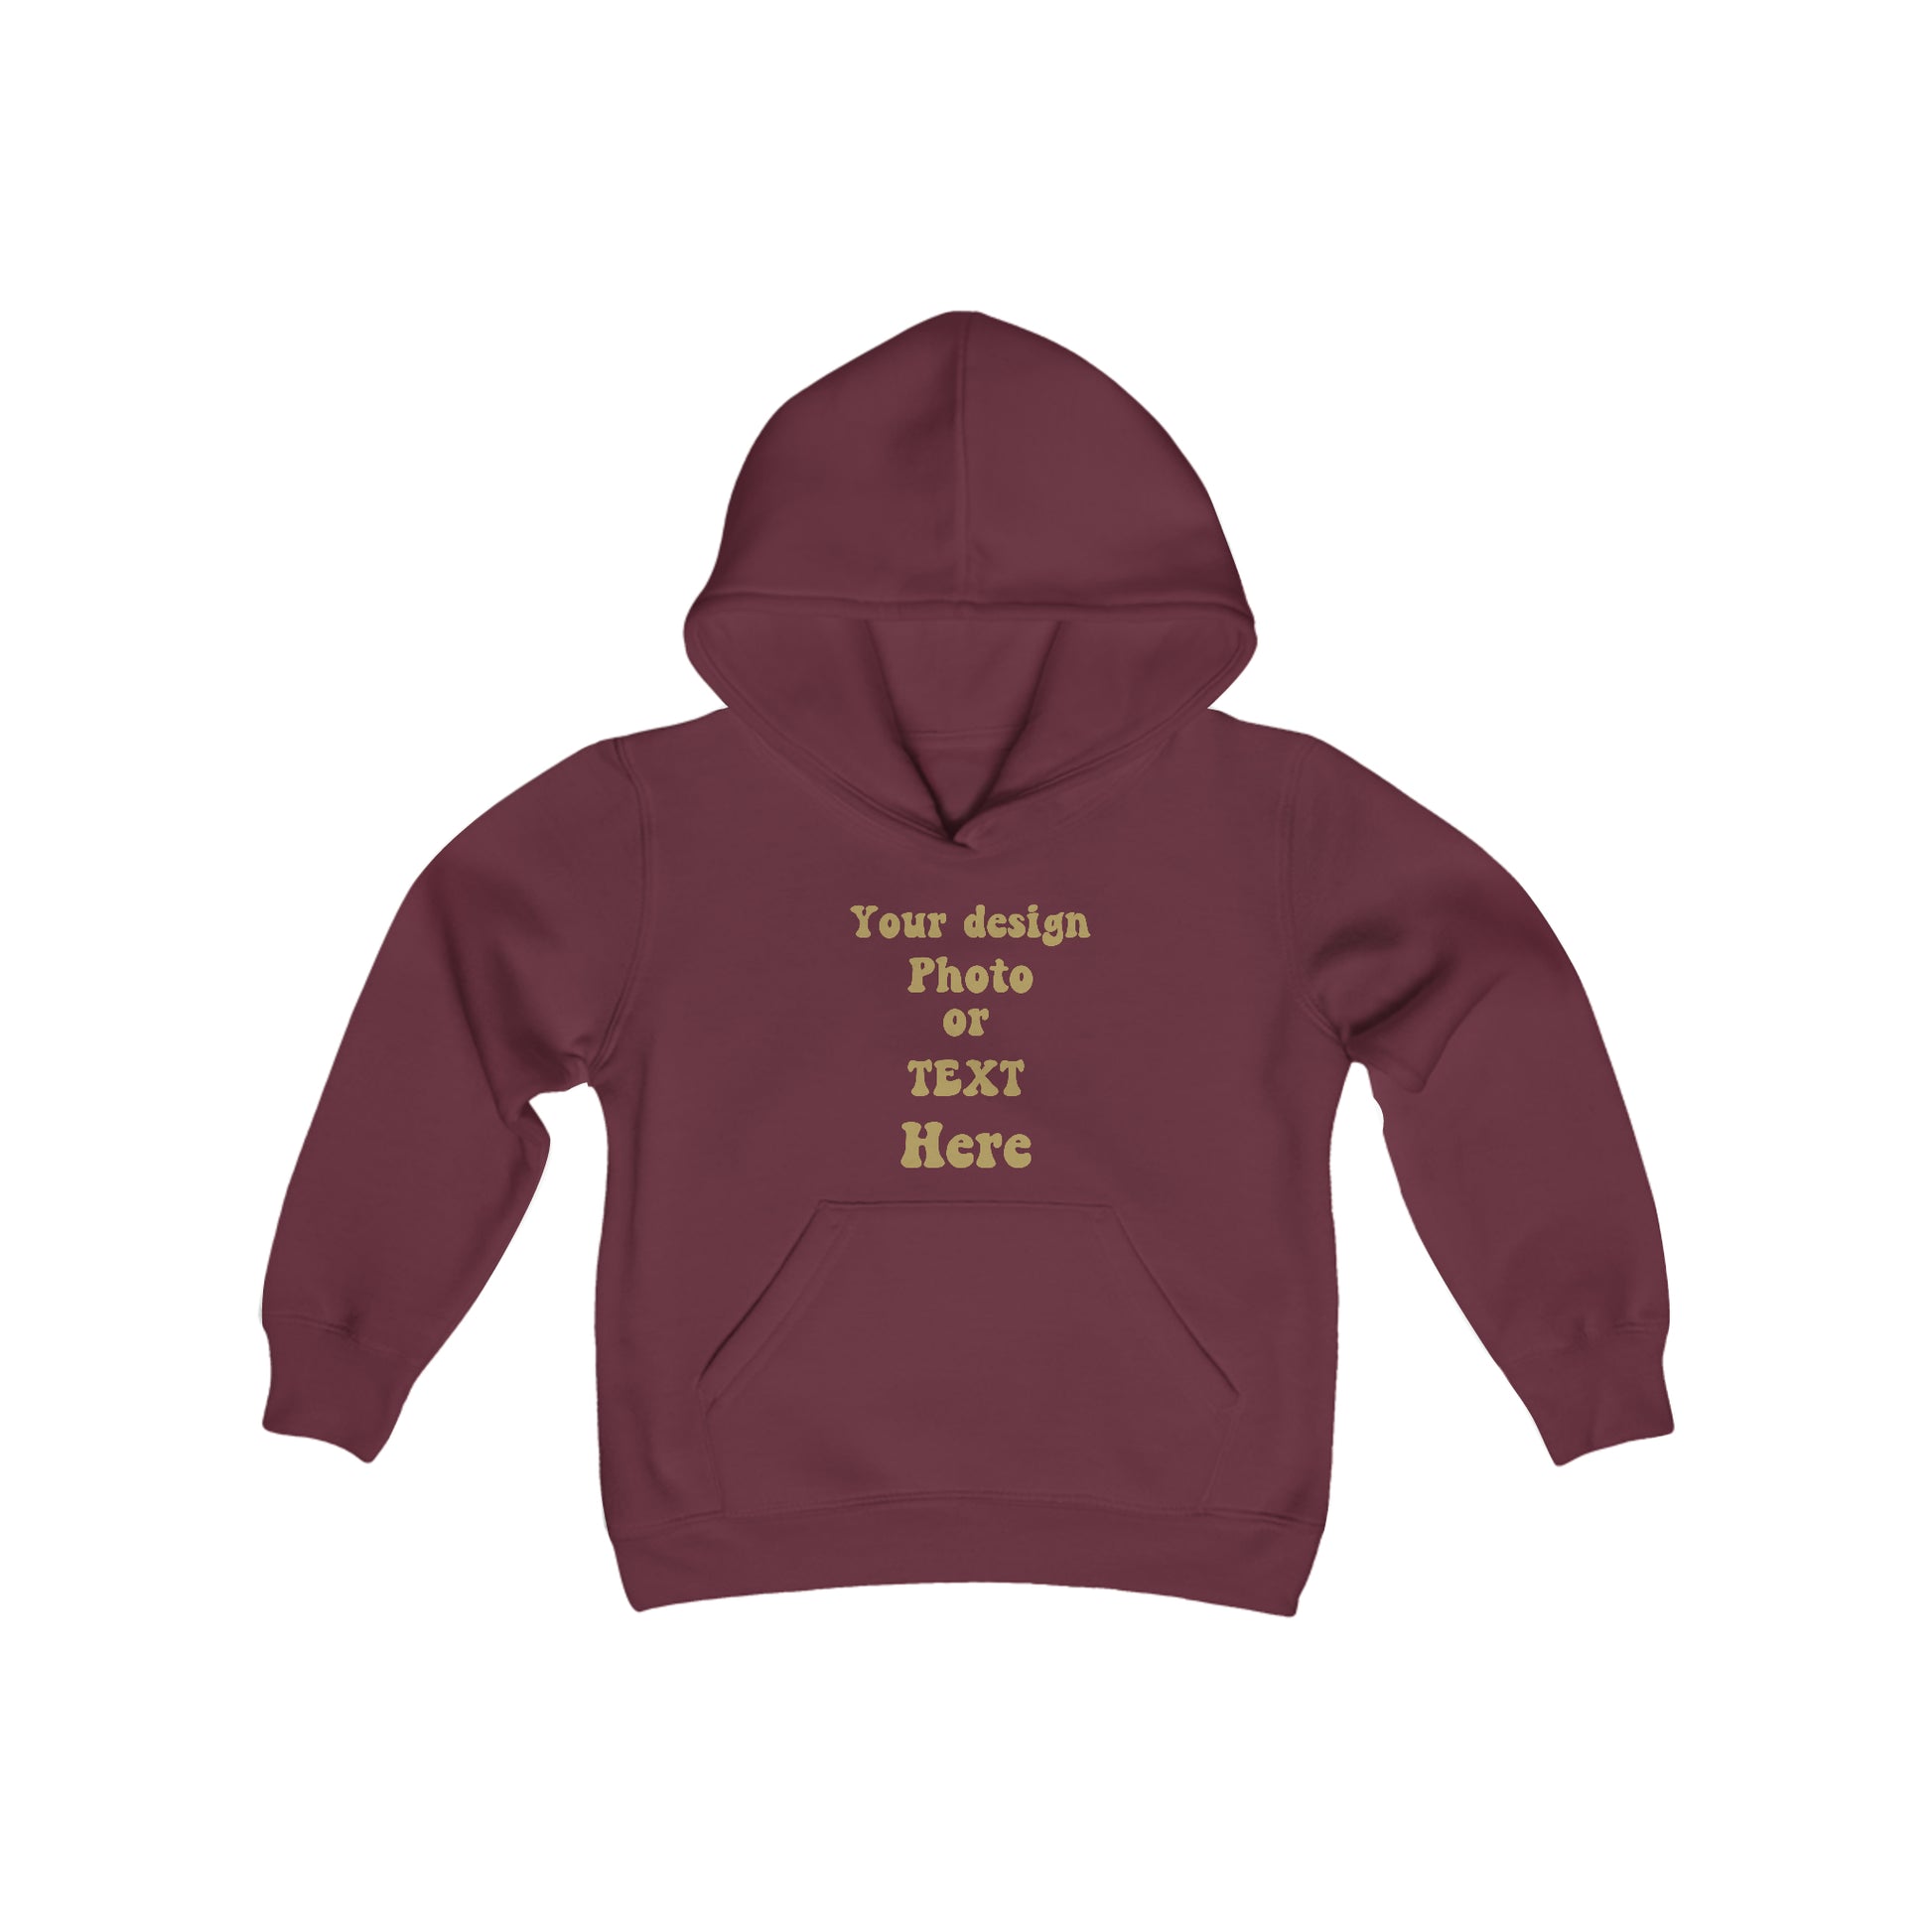 Youth Heavy Blend Hooded Sweatshirt - Personalize It with Text and Photo Kids clothes Maroon S 